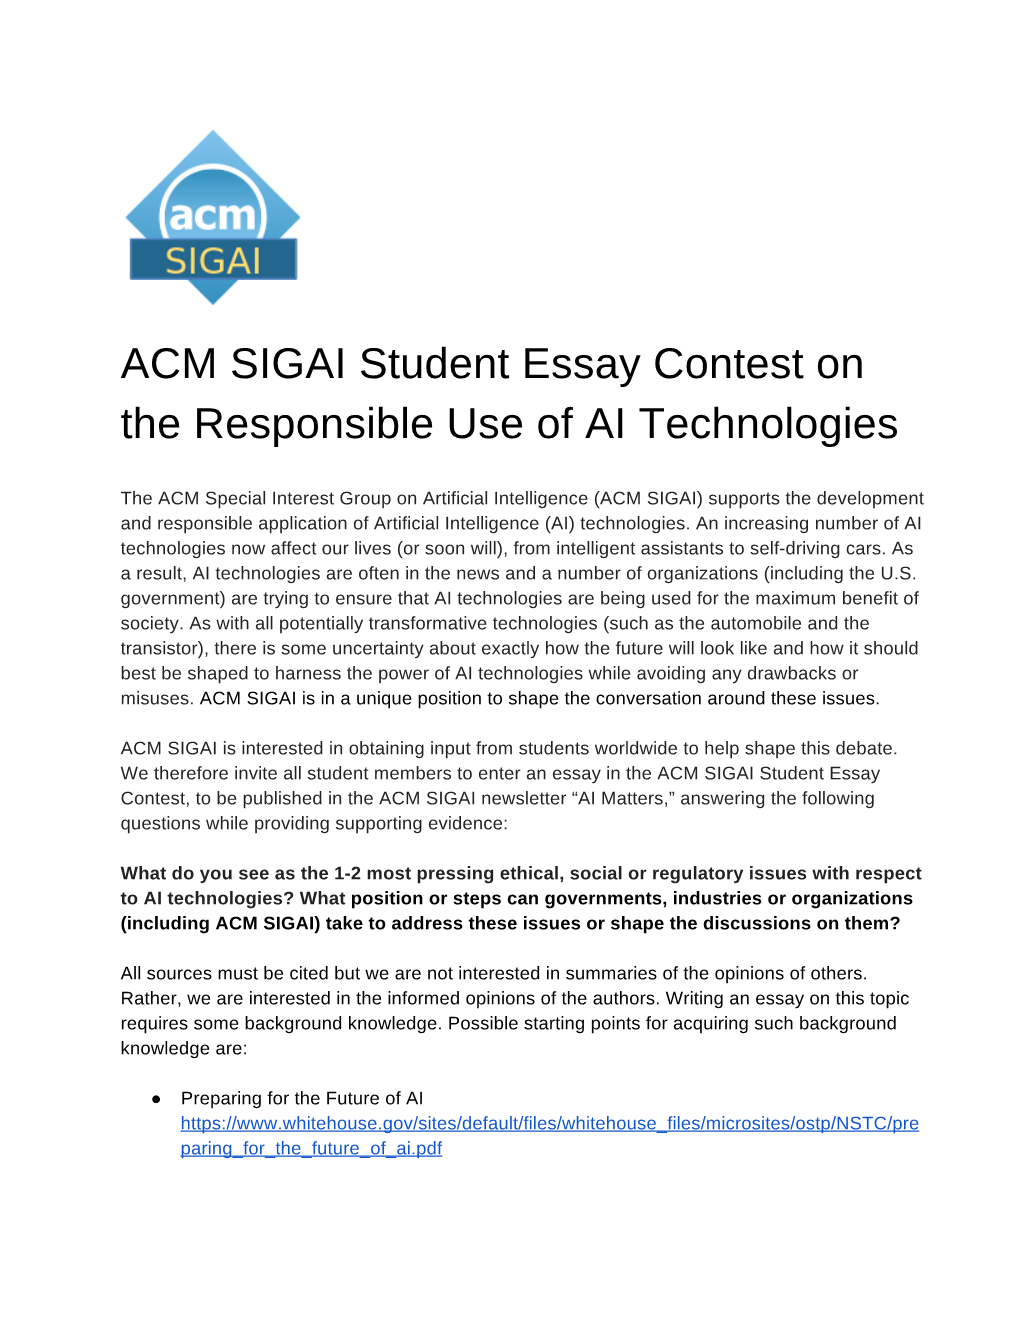 ACM SIGAI Student Essay Contest on the Responsible Use of AI Technologies